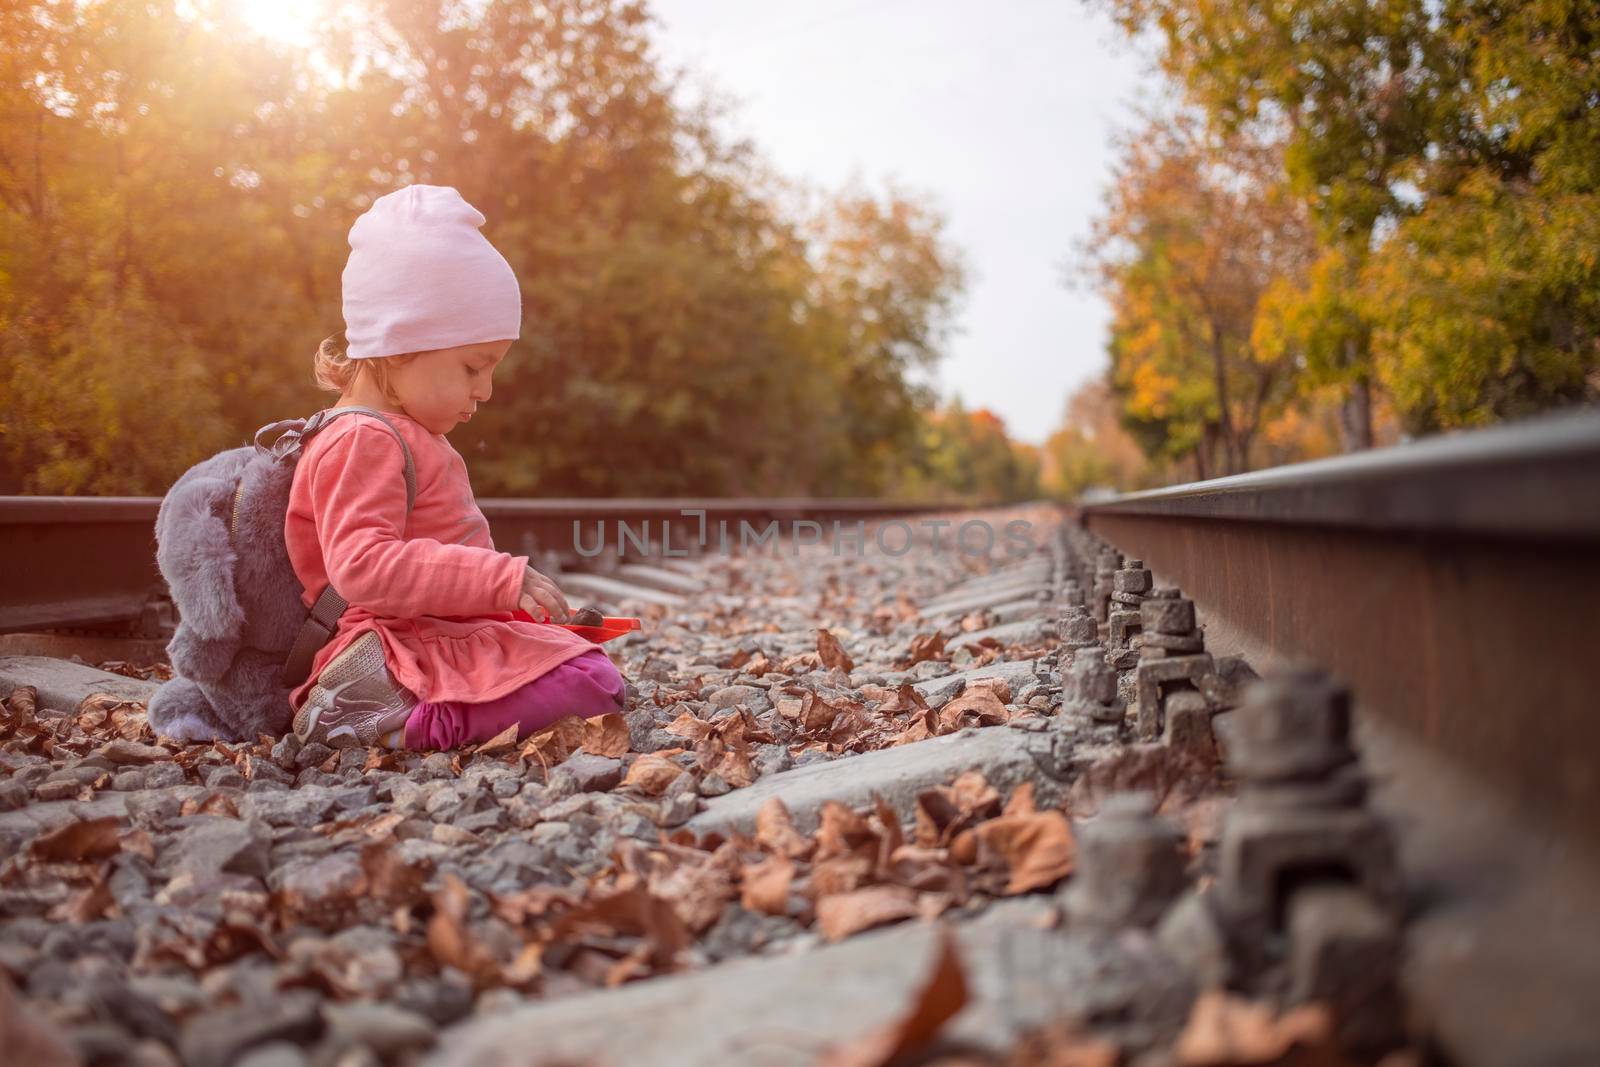 take care of children. a child plays in a dangerous place on the train tracks by Mariaprovector